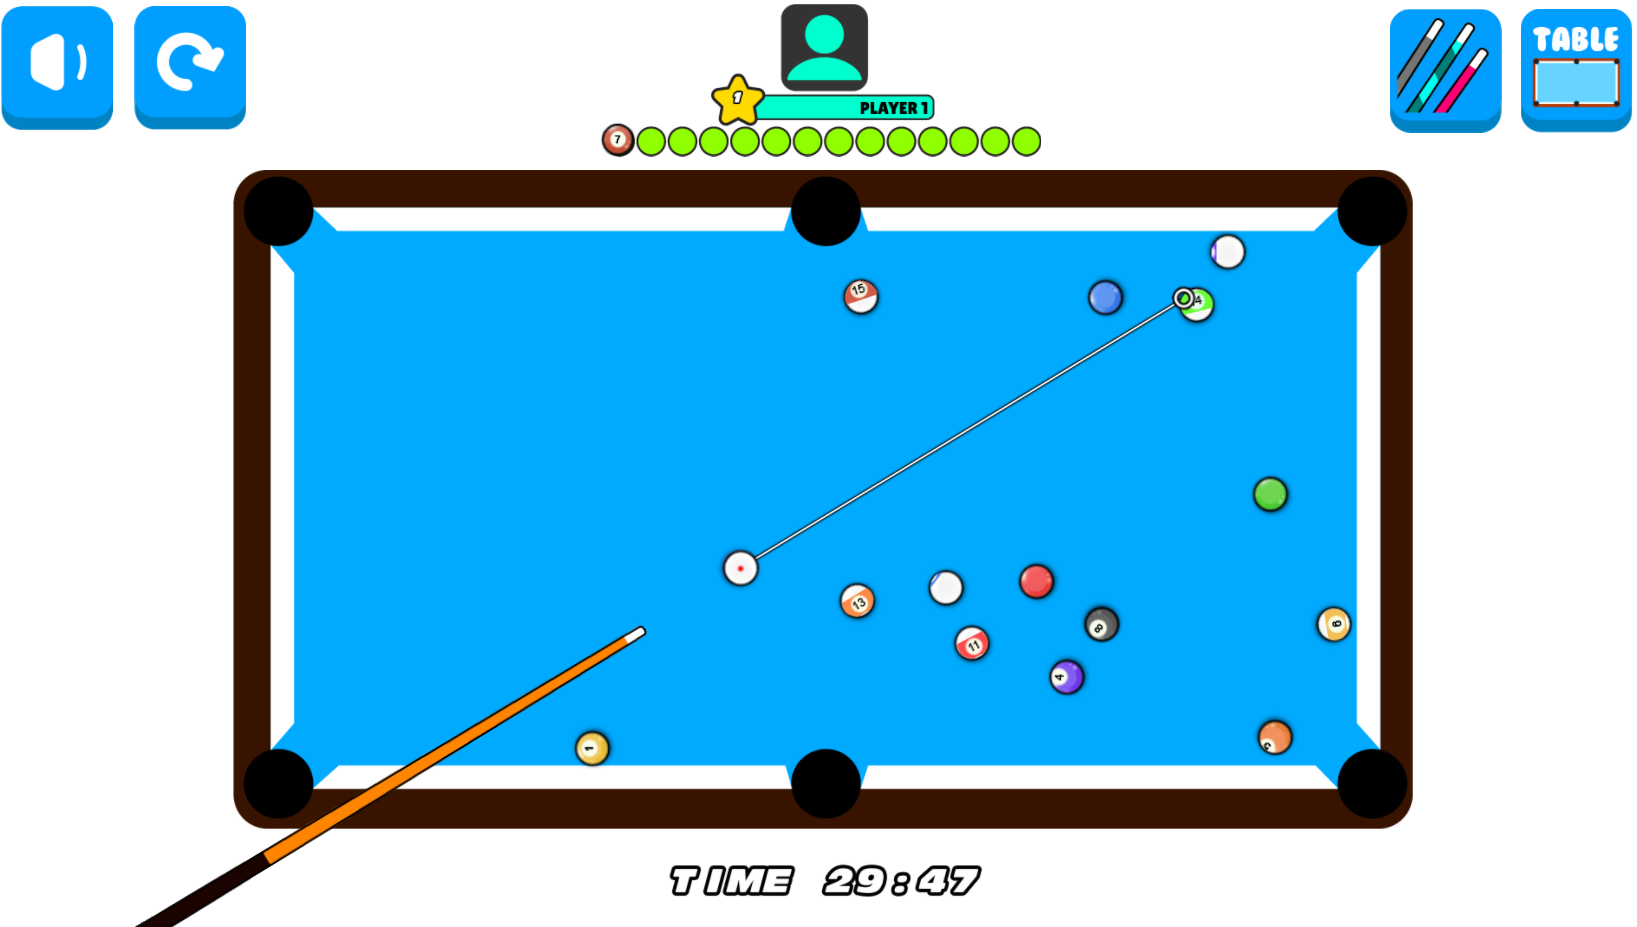 8 Ball Pool - HTML5 Construct 2 Game by codethislab